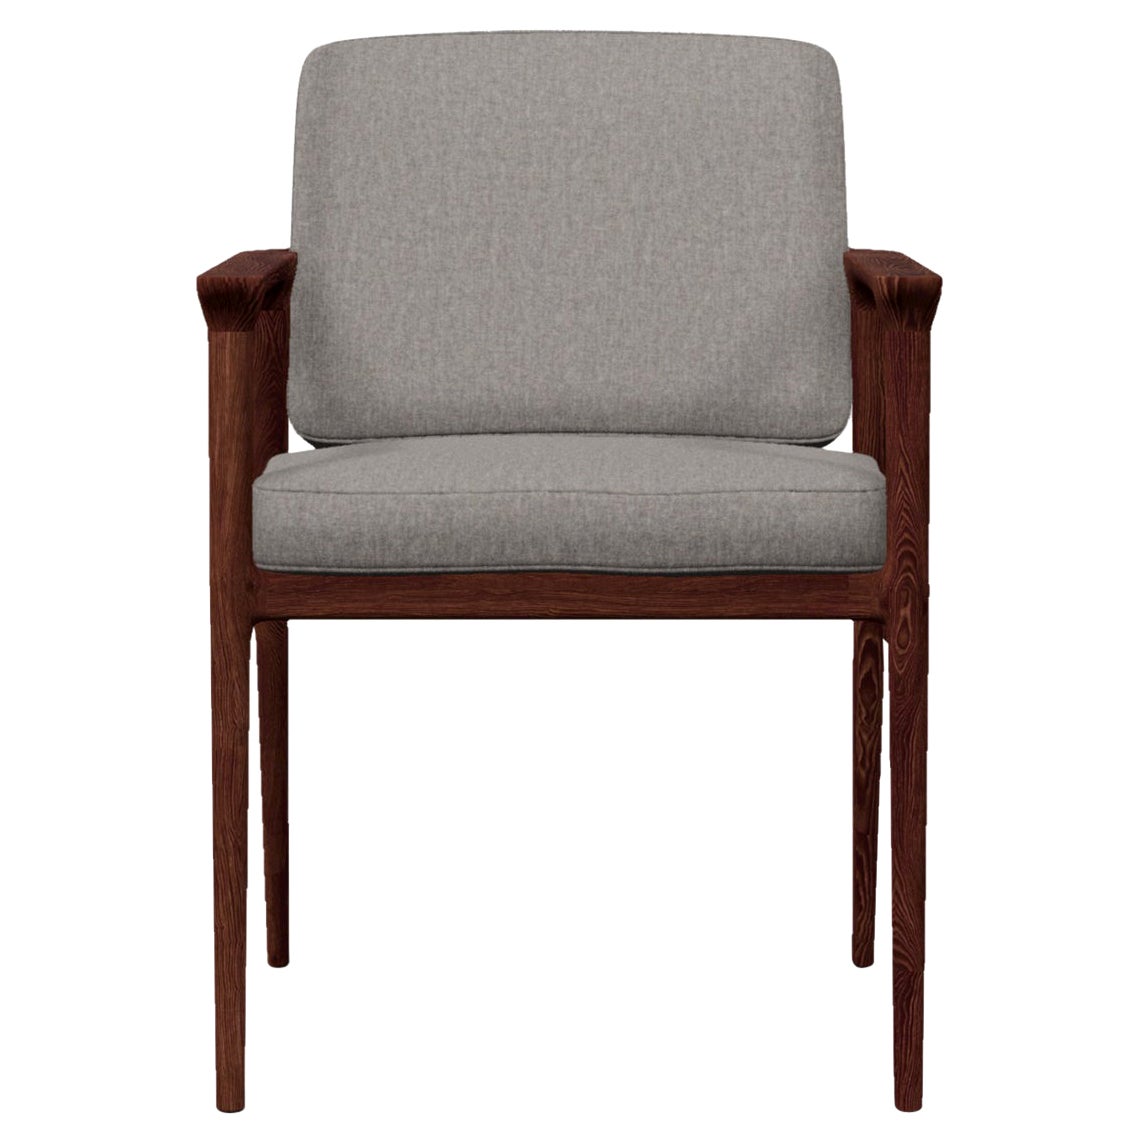 Moooi Zio Dining Chair in Vesper Aluminum Seat with Oak Stained Cinnamon Frame